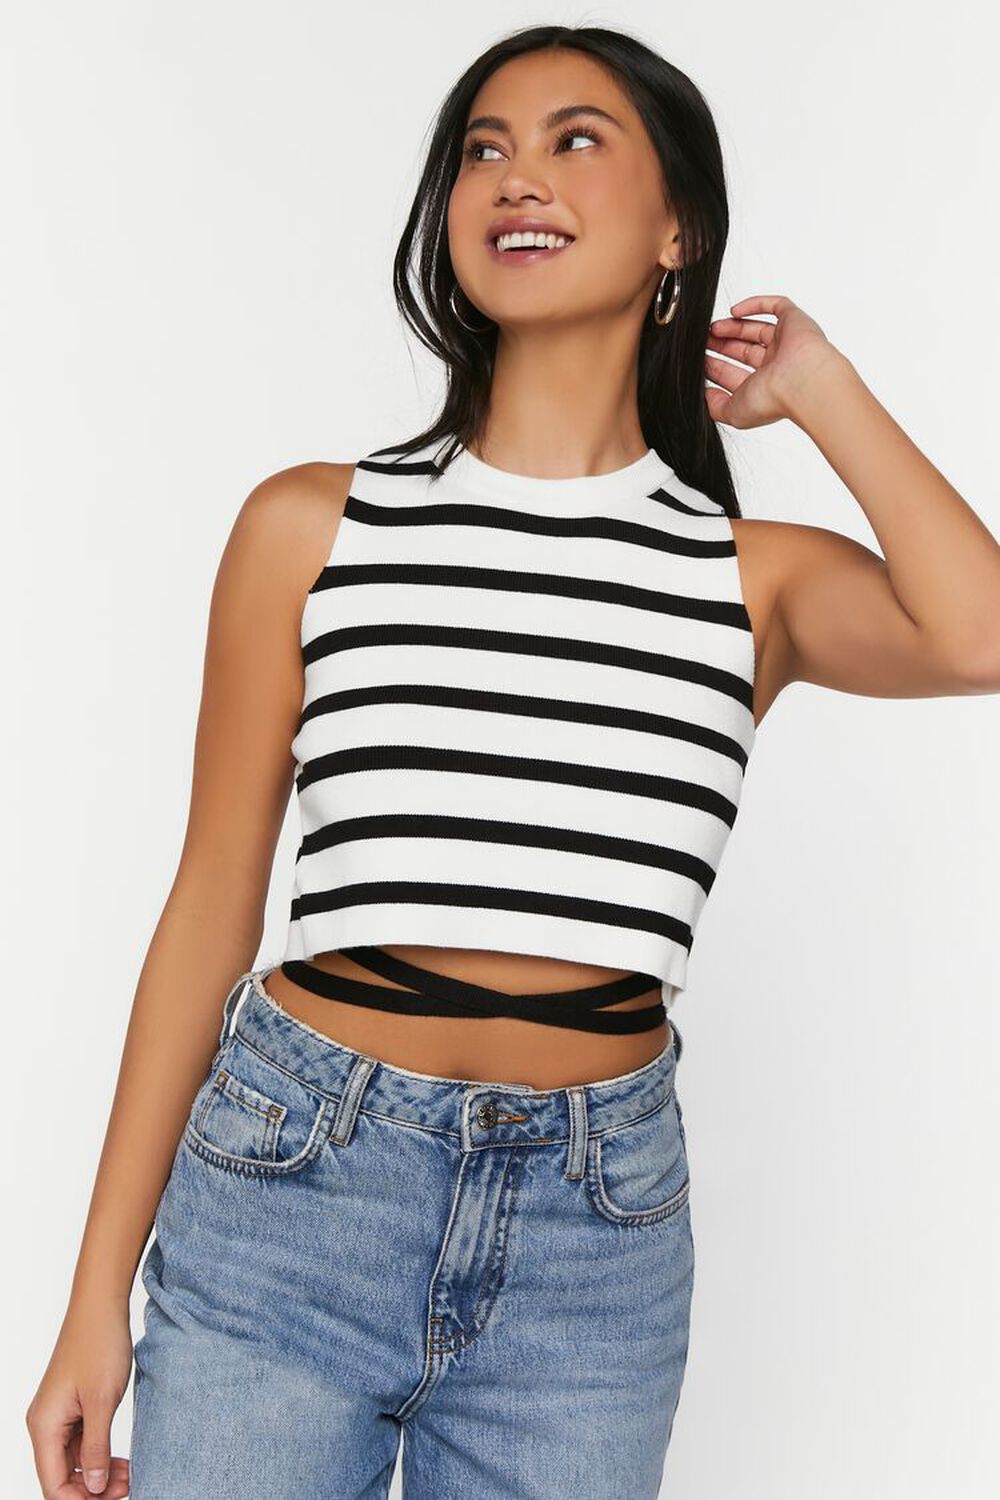 BLACK/WHITE Striped Strappy Sleeveless Crop Top, image 1